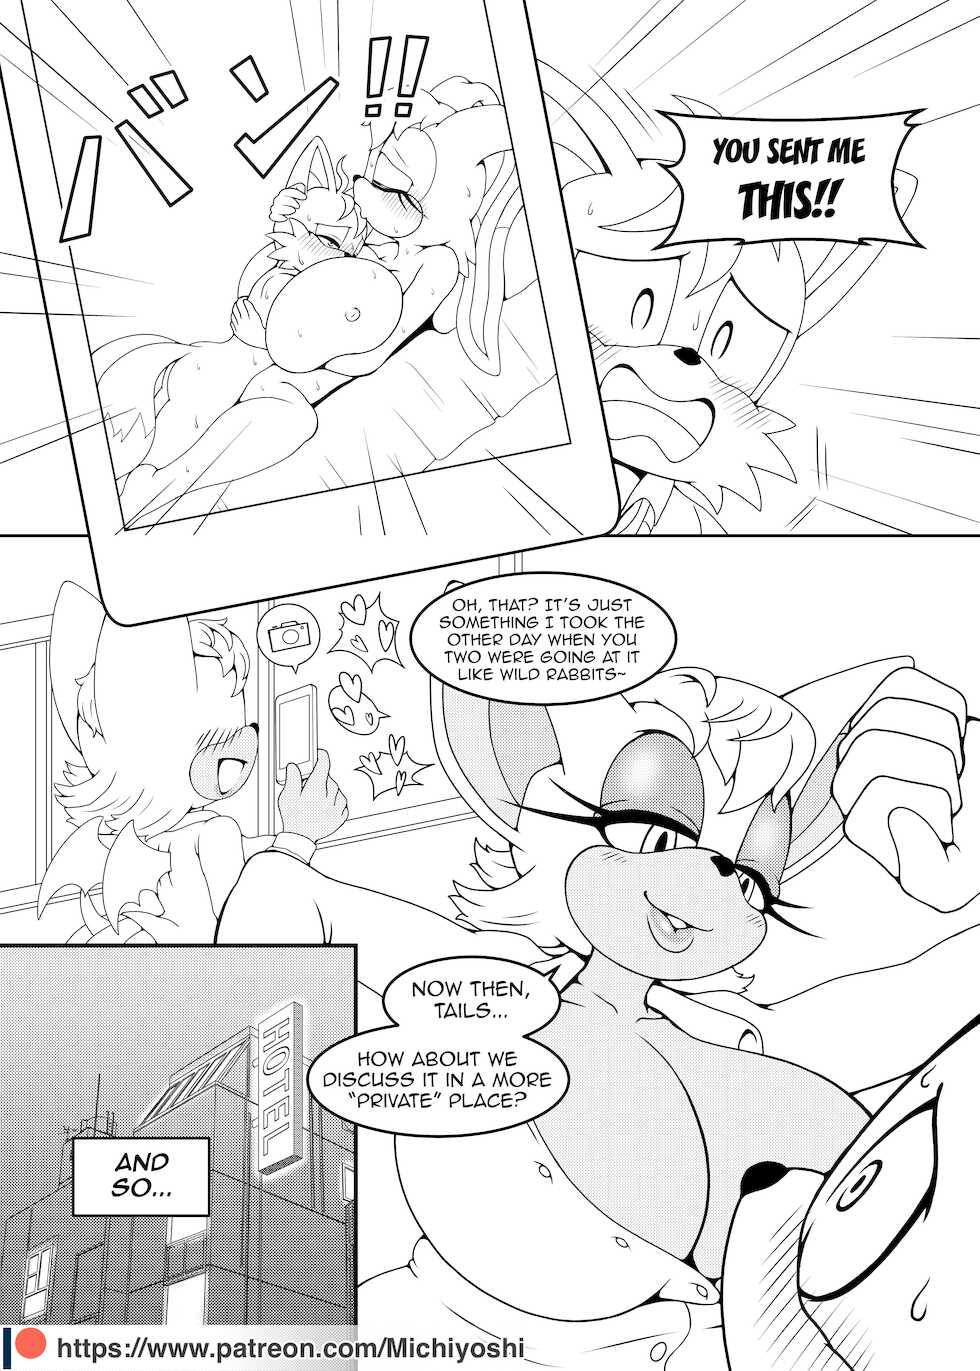 [Michiyoshi] Canned Furry Gaiden 3 (Sonic The Hedgehog) [Revised English] - Page 6